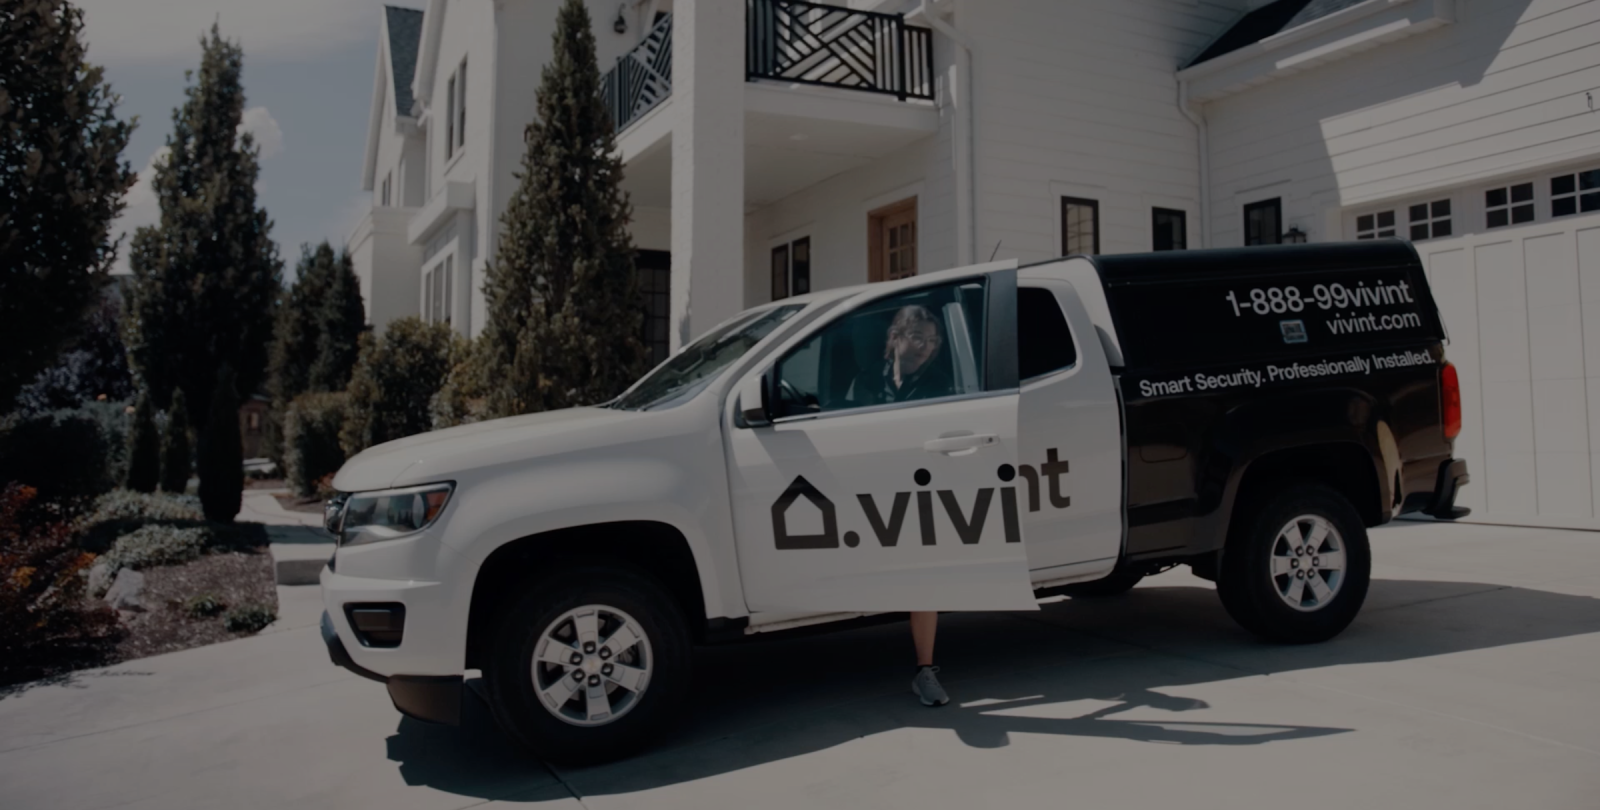 Smart Home Pro climbs out of their black and white Vivint technician truck